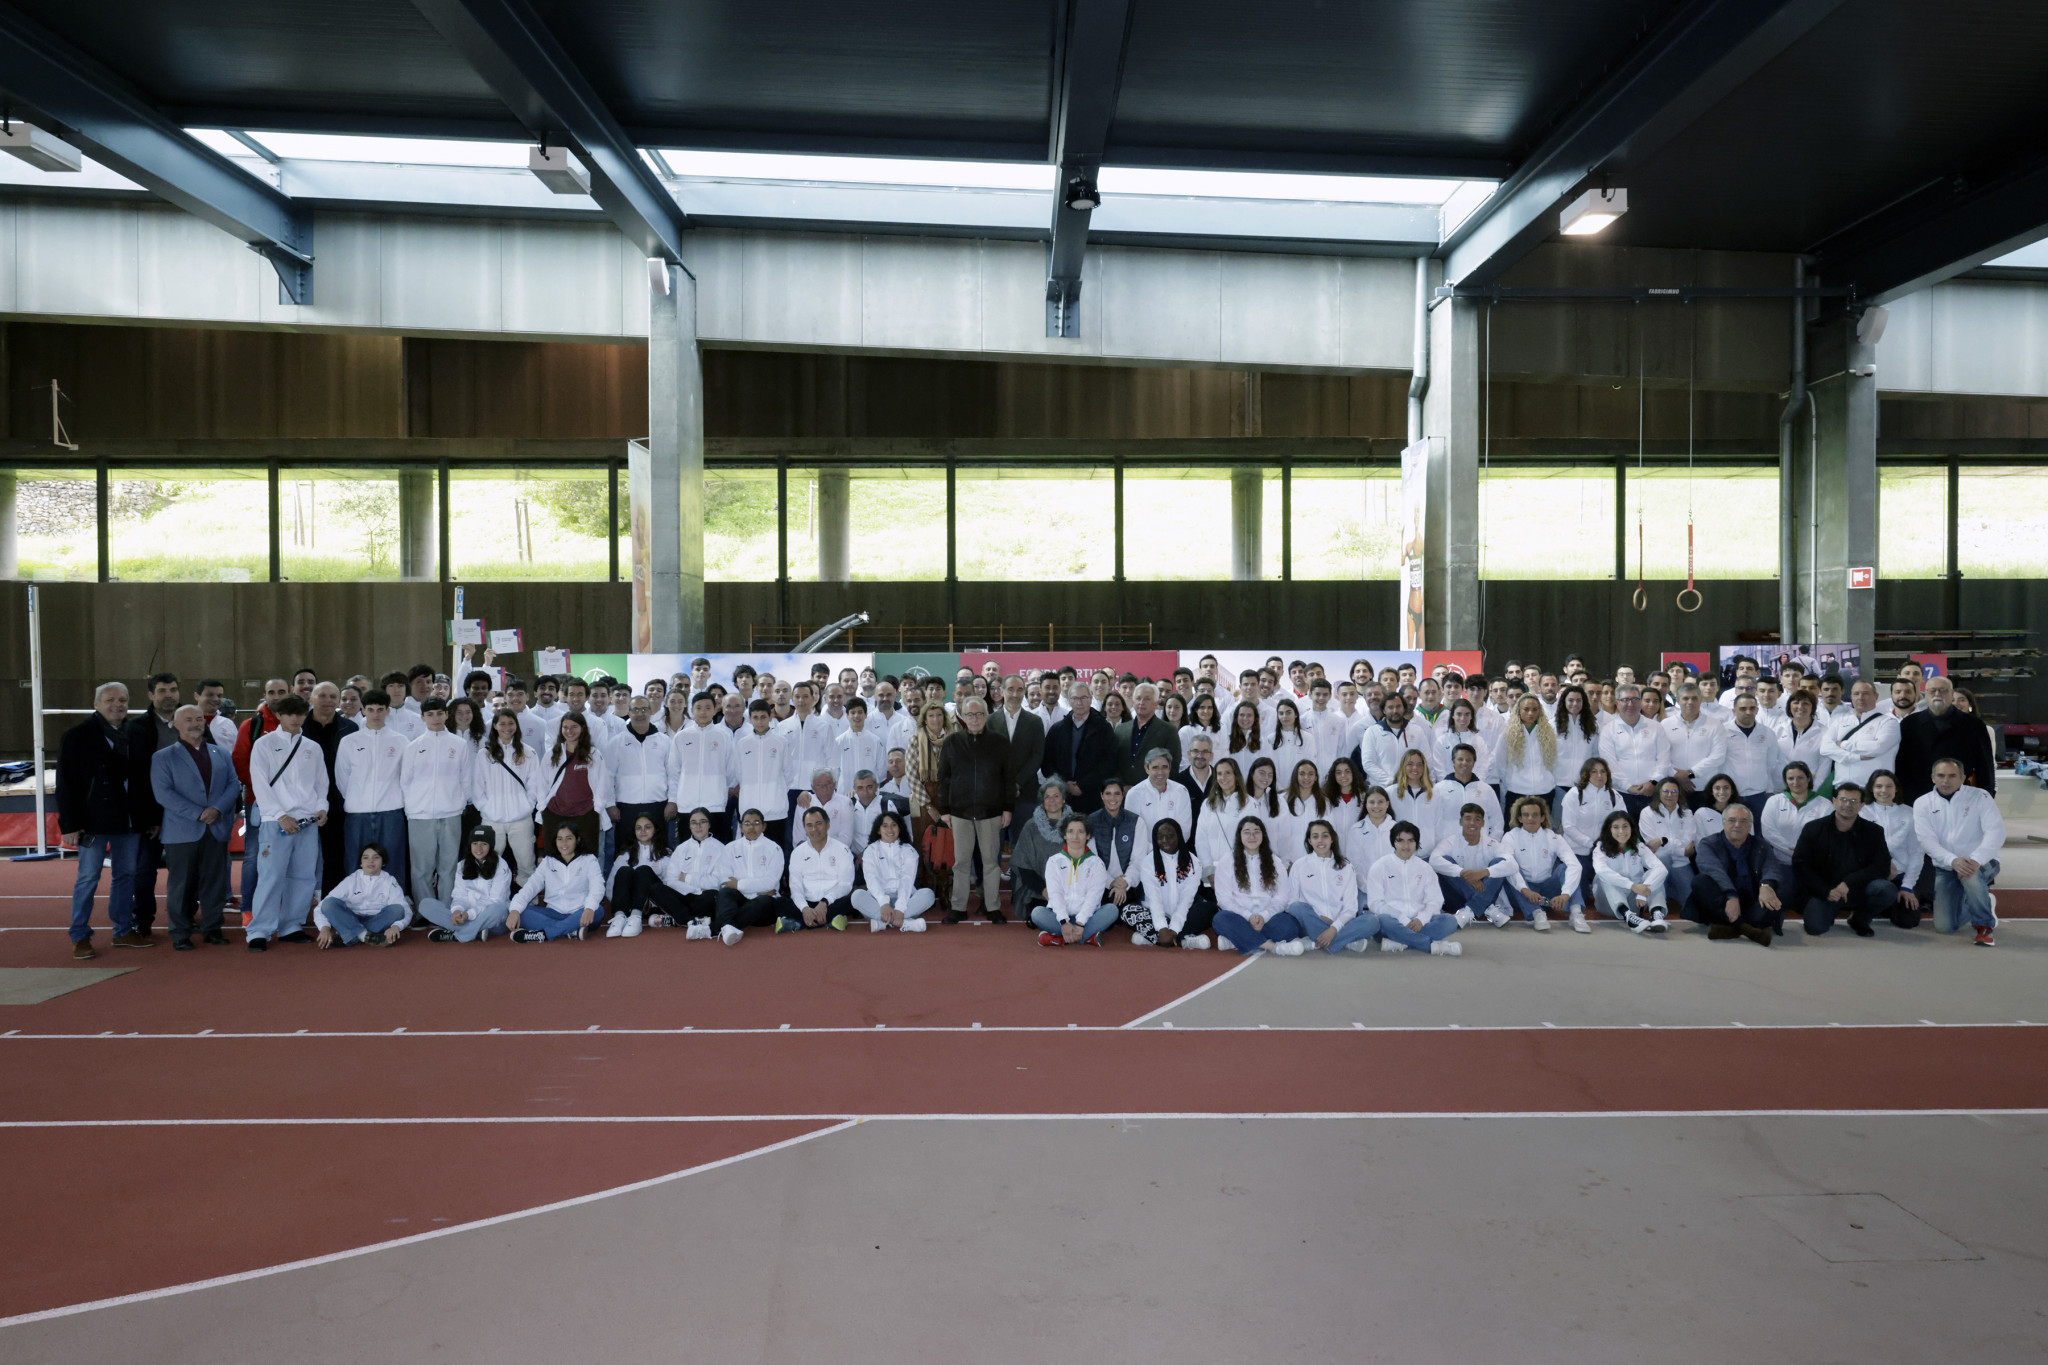 The two-day National Meeting of Olympic Hopes, organised by the Portugal NOC, is designed to prepare young athletes for the Los Angeles 2028 and Brisbane 2032 Olympics ©Portugal NOC